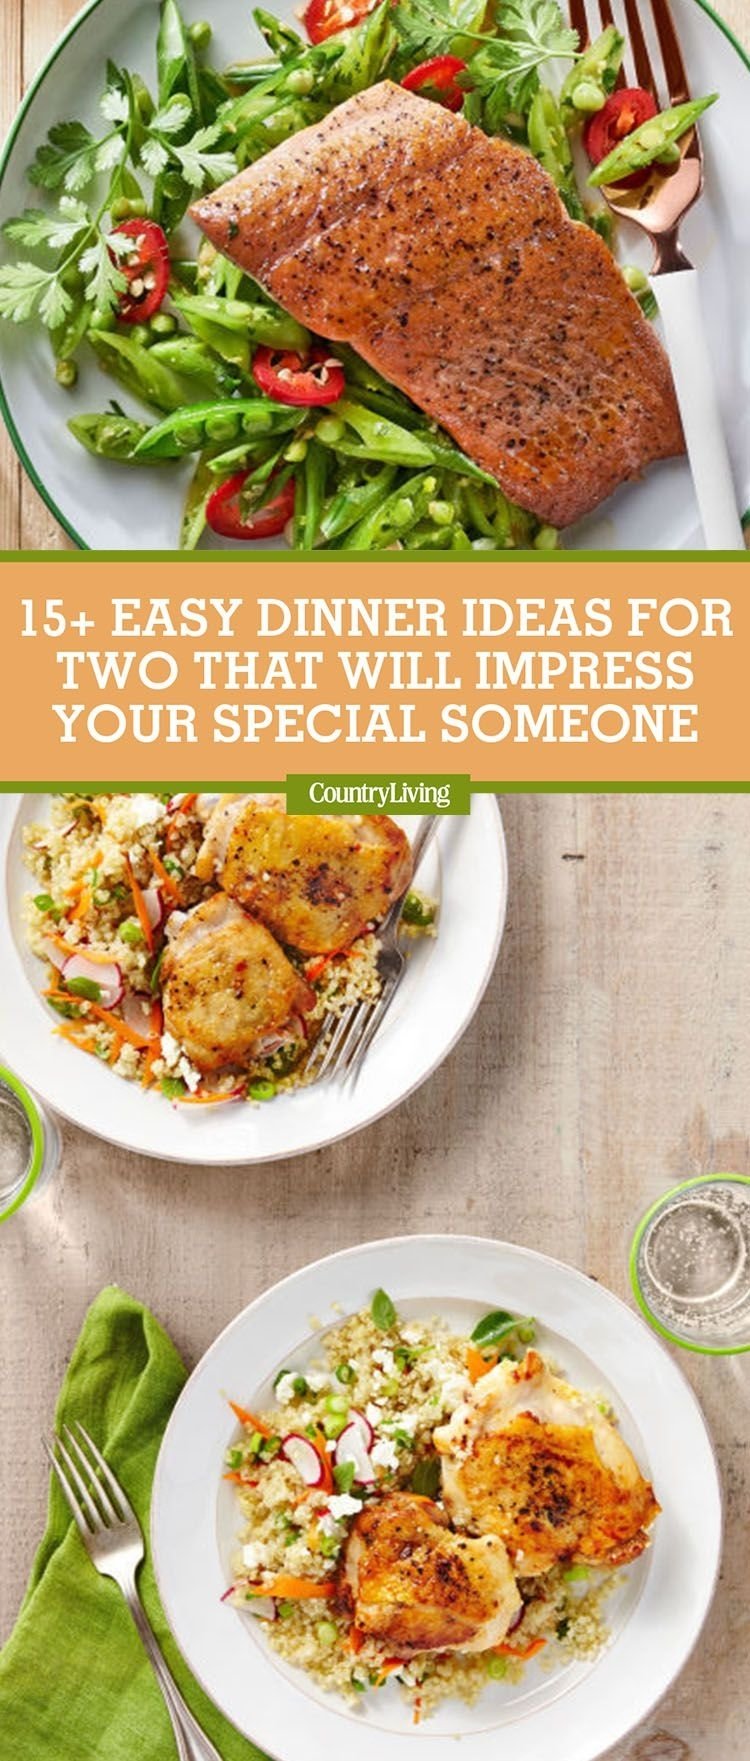 10 Stylish Delicious Dinner Ideas For Two 17 easy dinner ideas for two romantic dinner for two recipes 7 2023